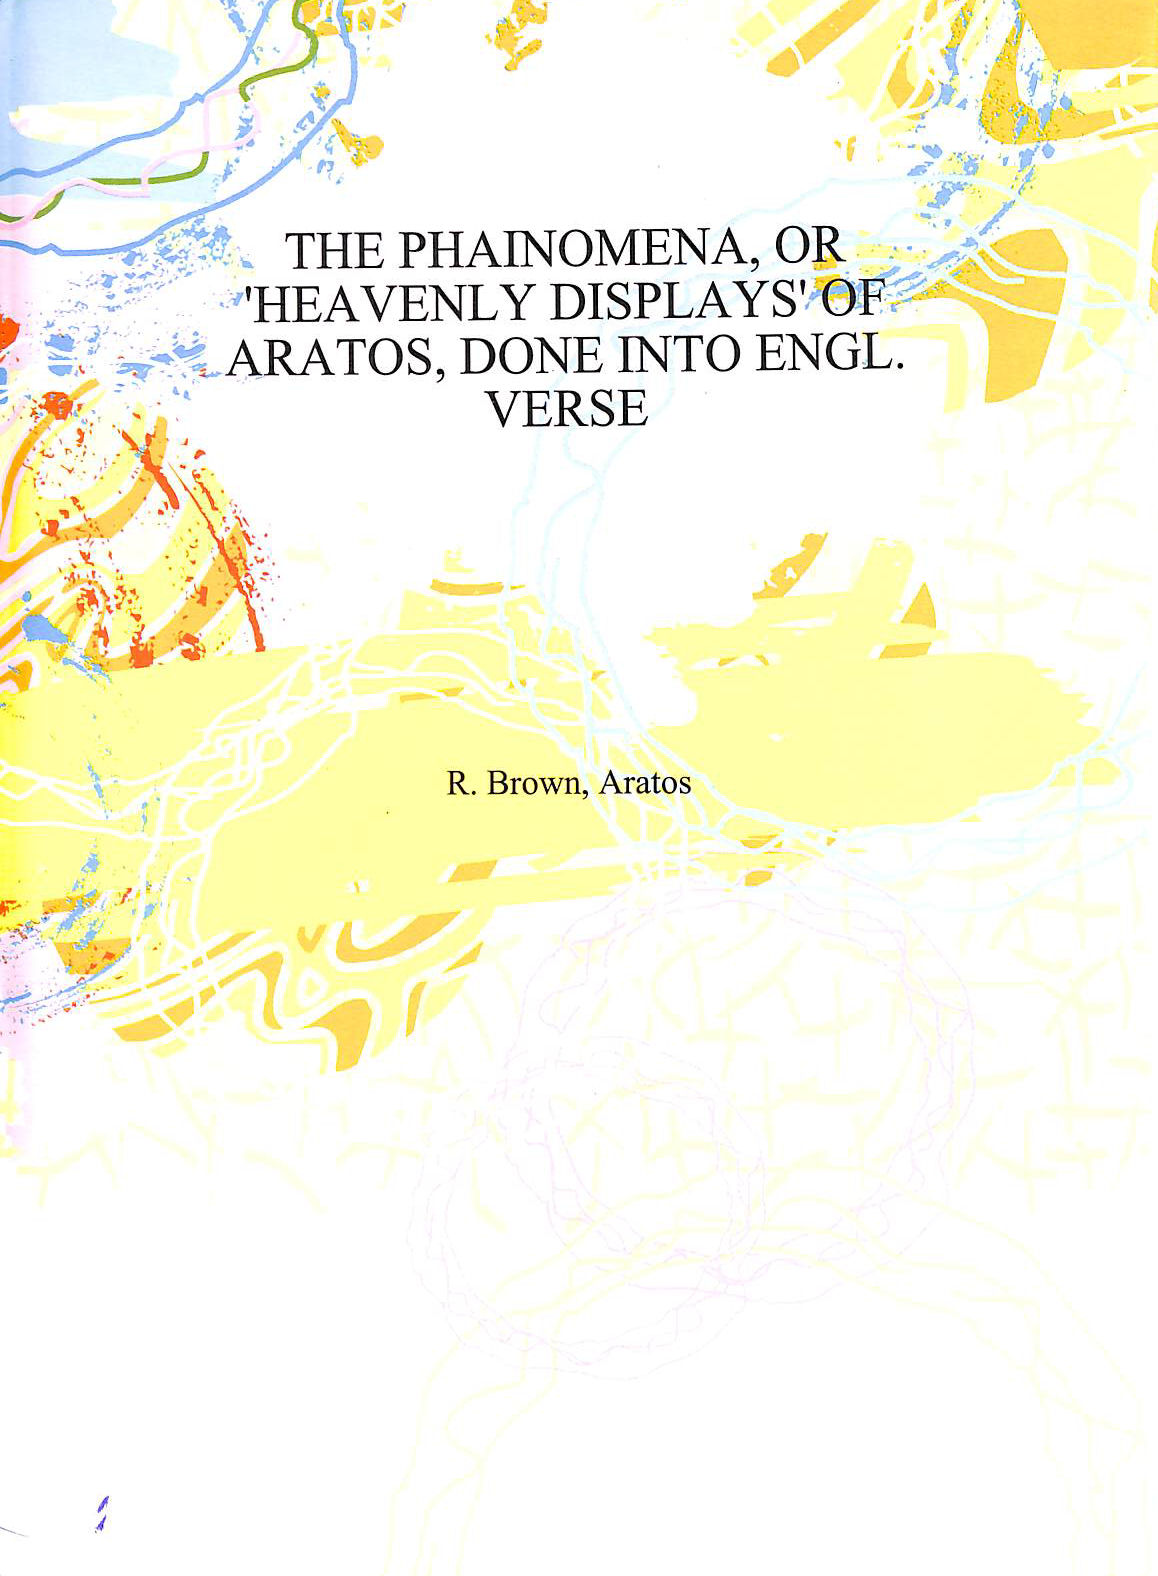 ROBERT BROWN ARATOS - The Phainomena, or 'Heavenly displays' of Aratus, done into Engl. verse by R. Brown 1885 [Hardcover]